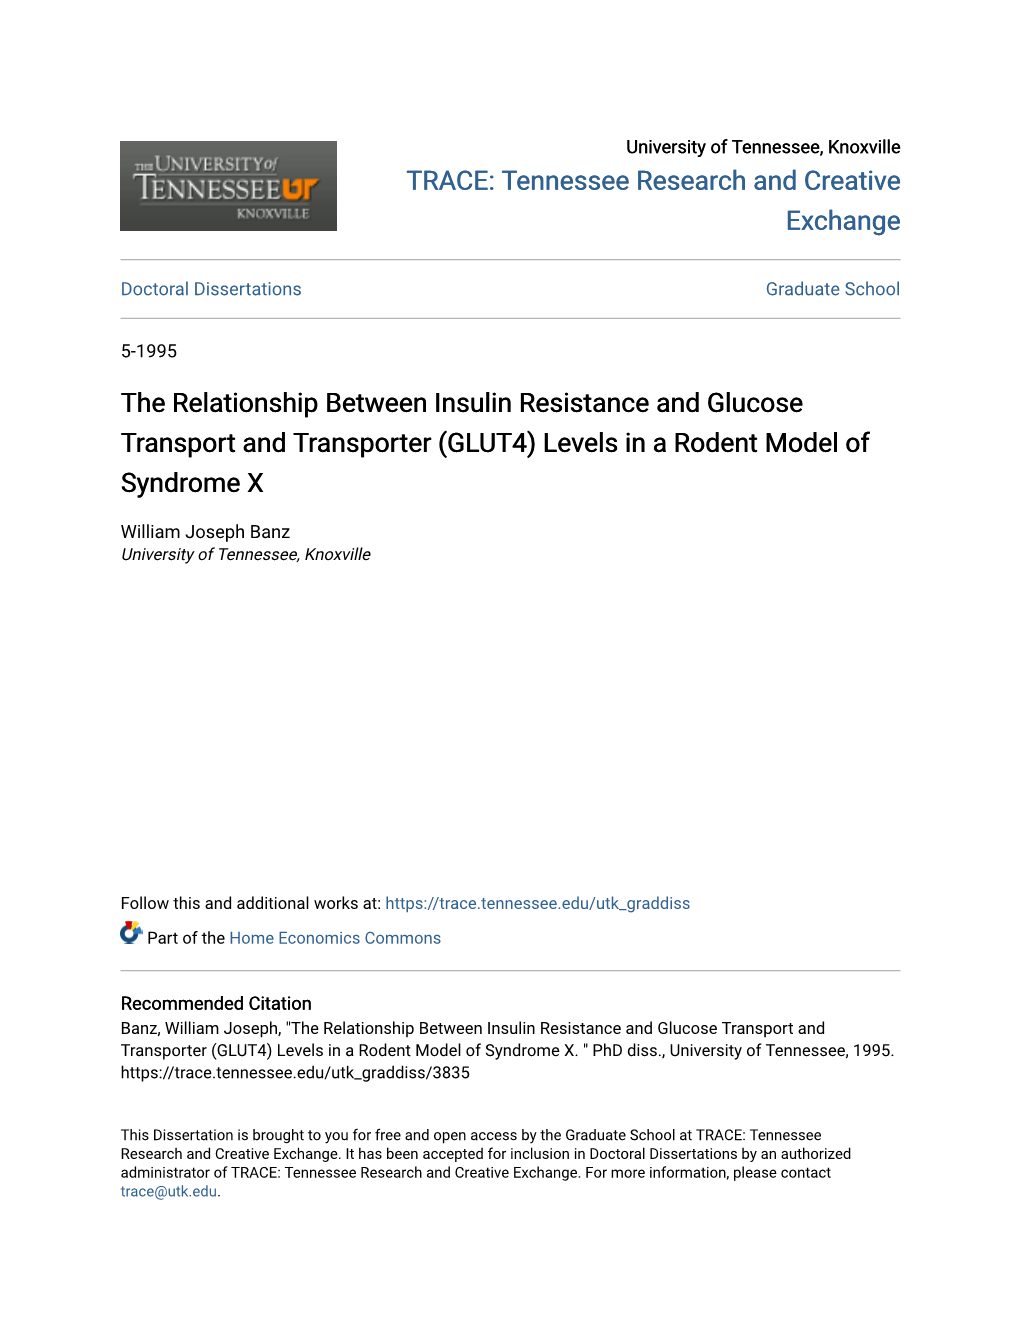 The Relationship Between Insulin Resistance and Glucose Transport and Transporter (GLUT4) Levels in a Rodent Model of Syndrome X